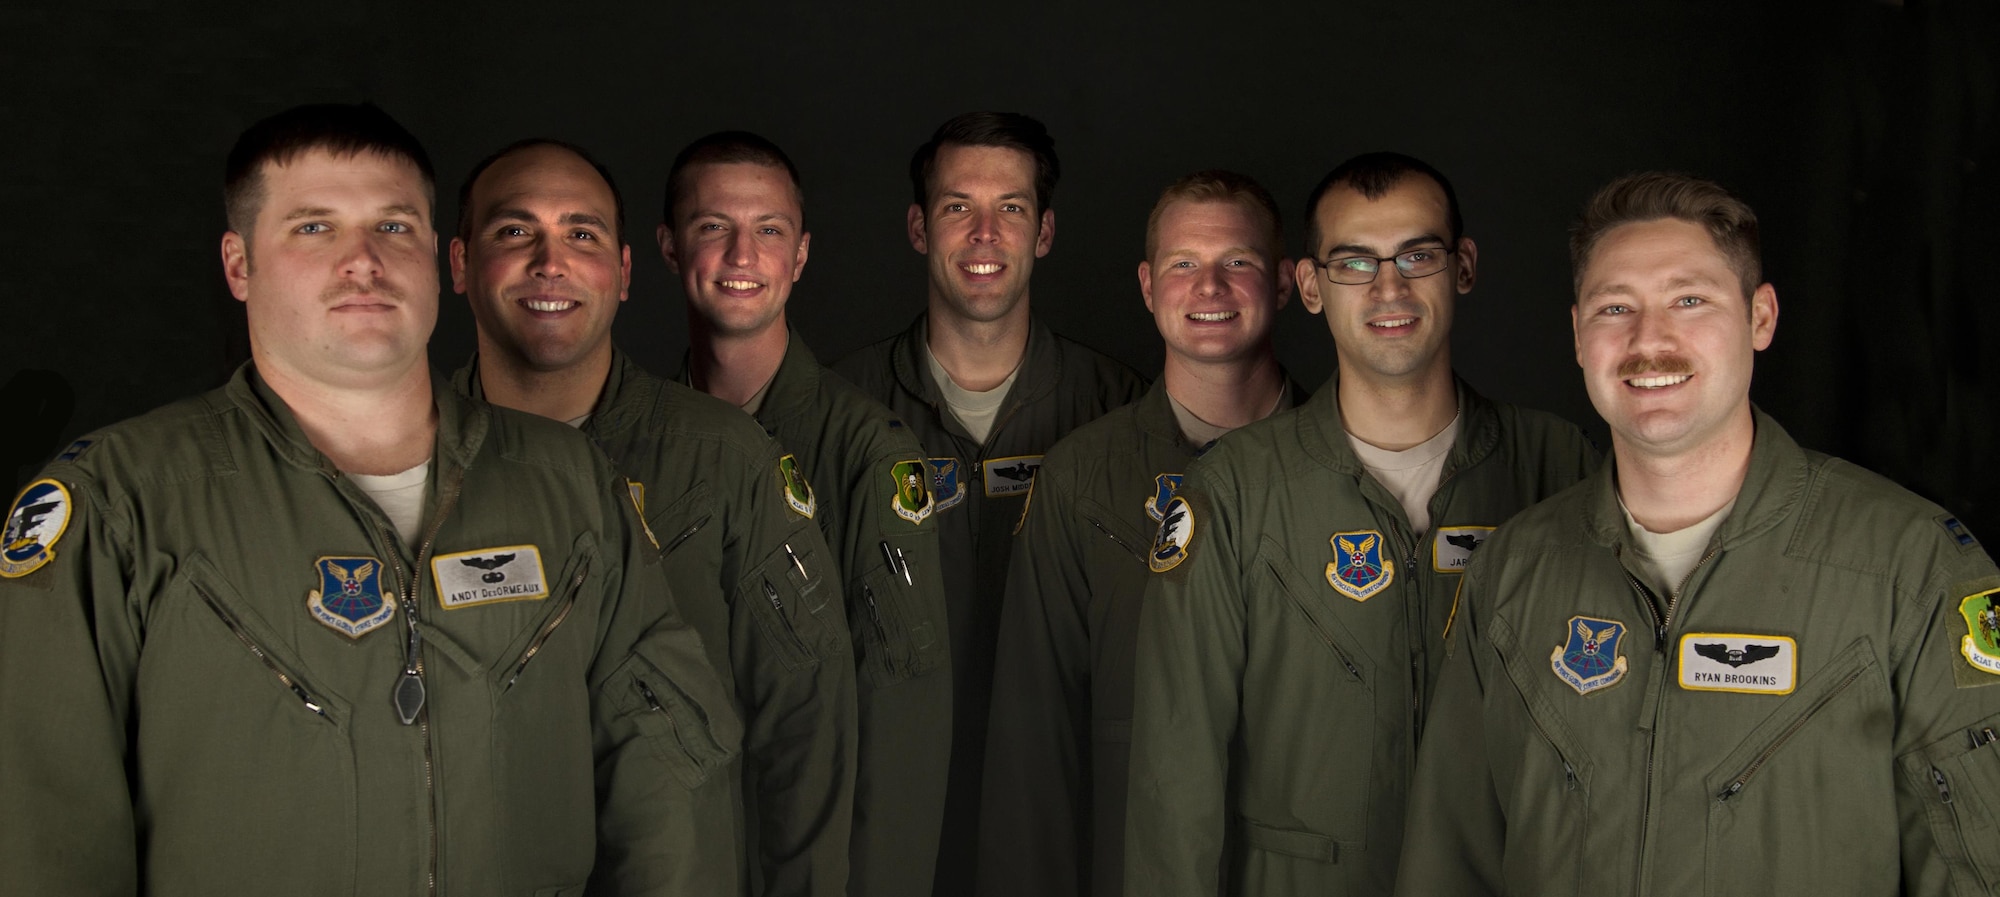 Unaware the events ahead of them, a Minot-based, seven-man B-52H Stratofortress aircrew, HAIL 13, and their Barksdale wingman, HAIL 14, received a call for help from the Anchorage Air Traffic Control Center, after the pilot of a small Cessna plane became disoriented after flying into bad weather.